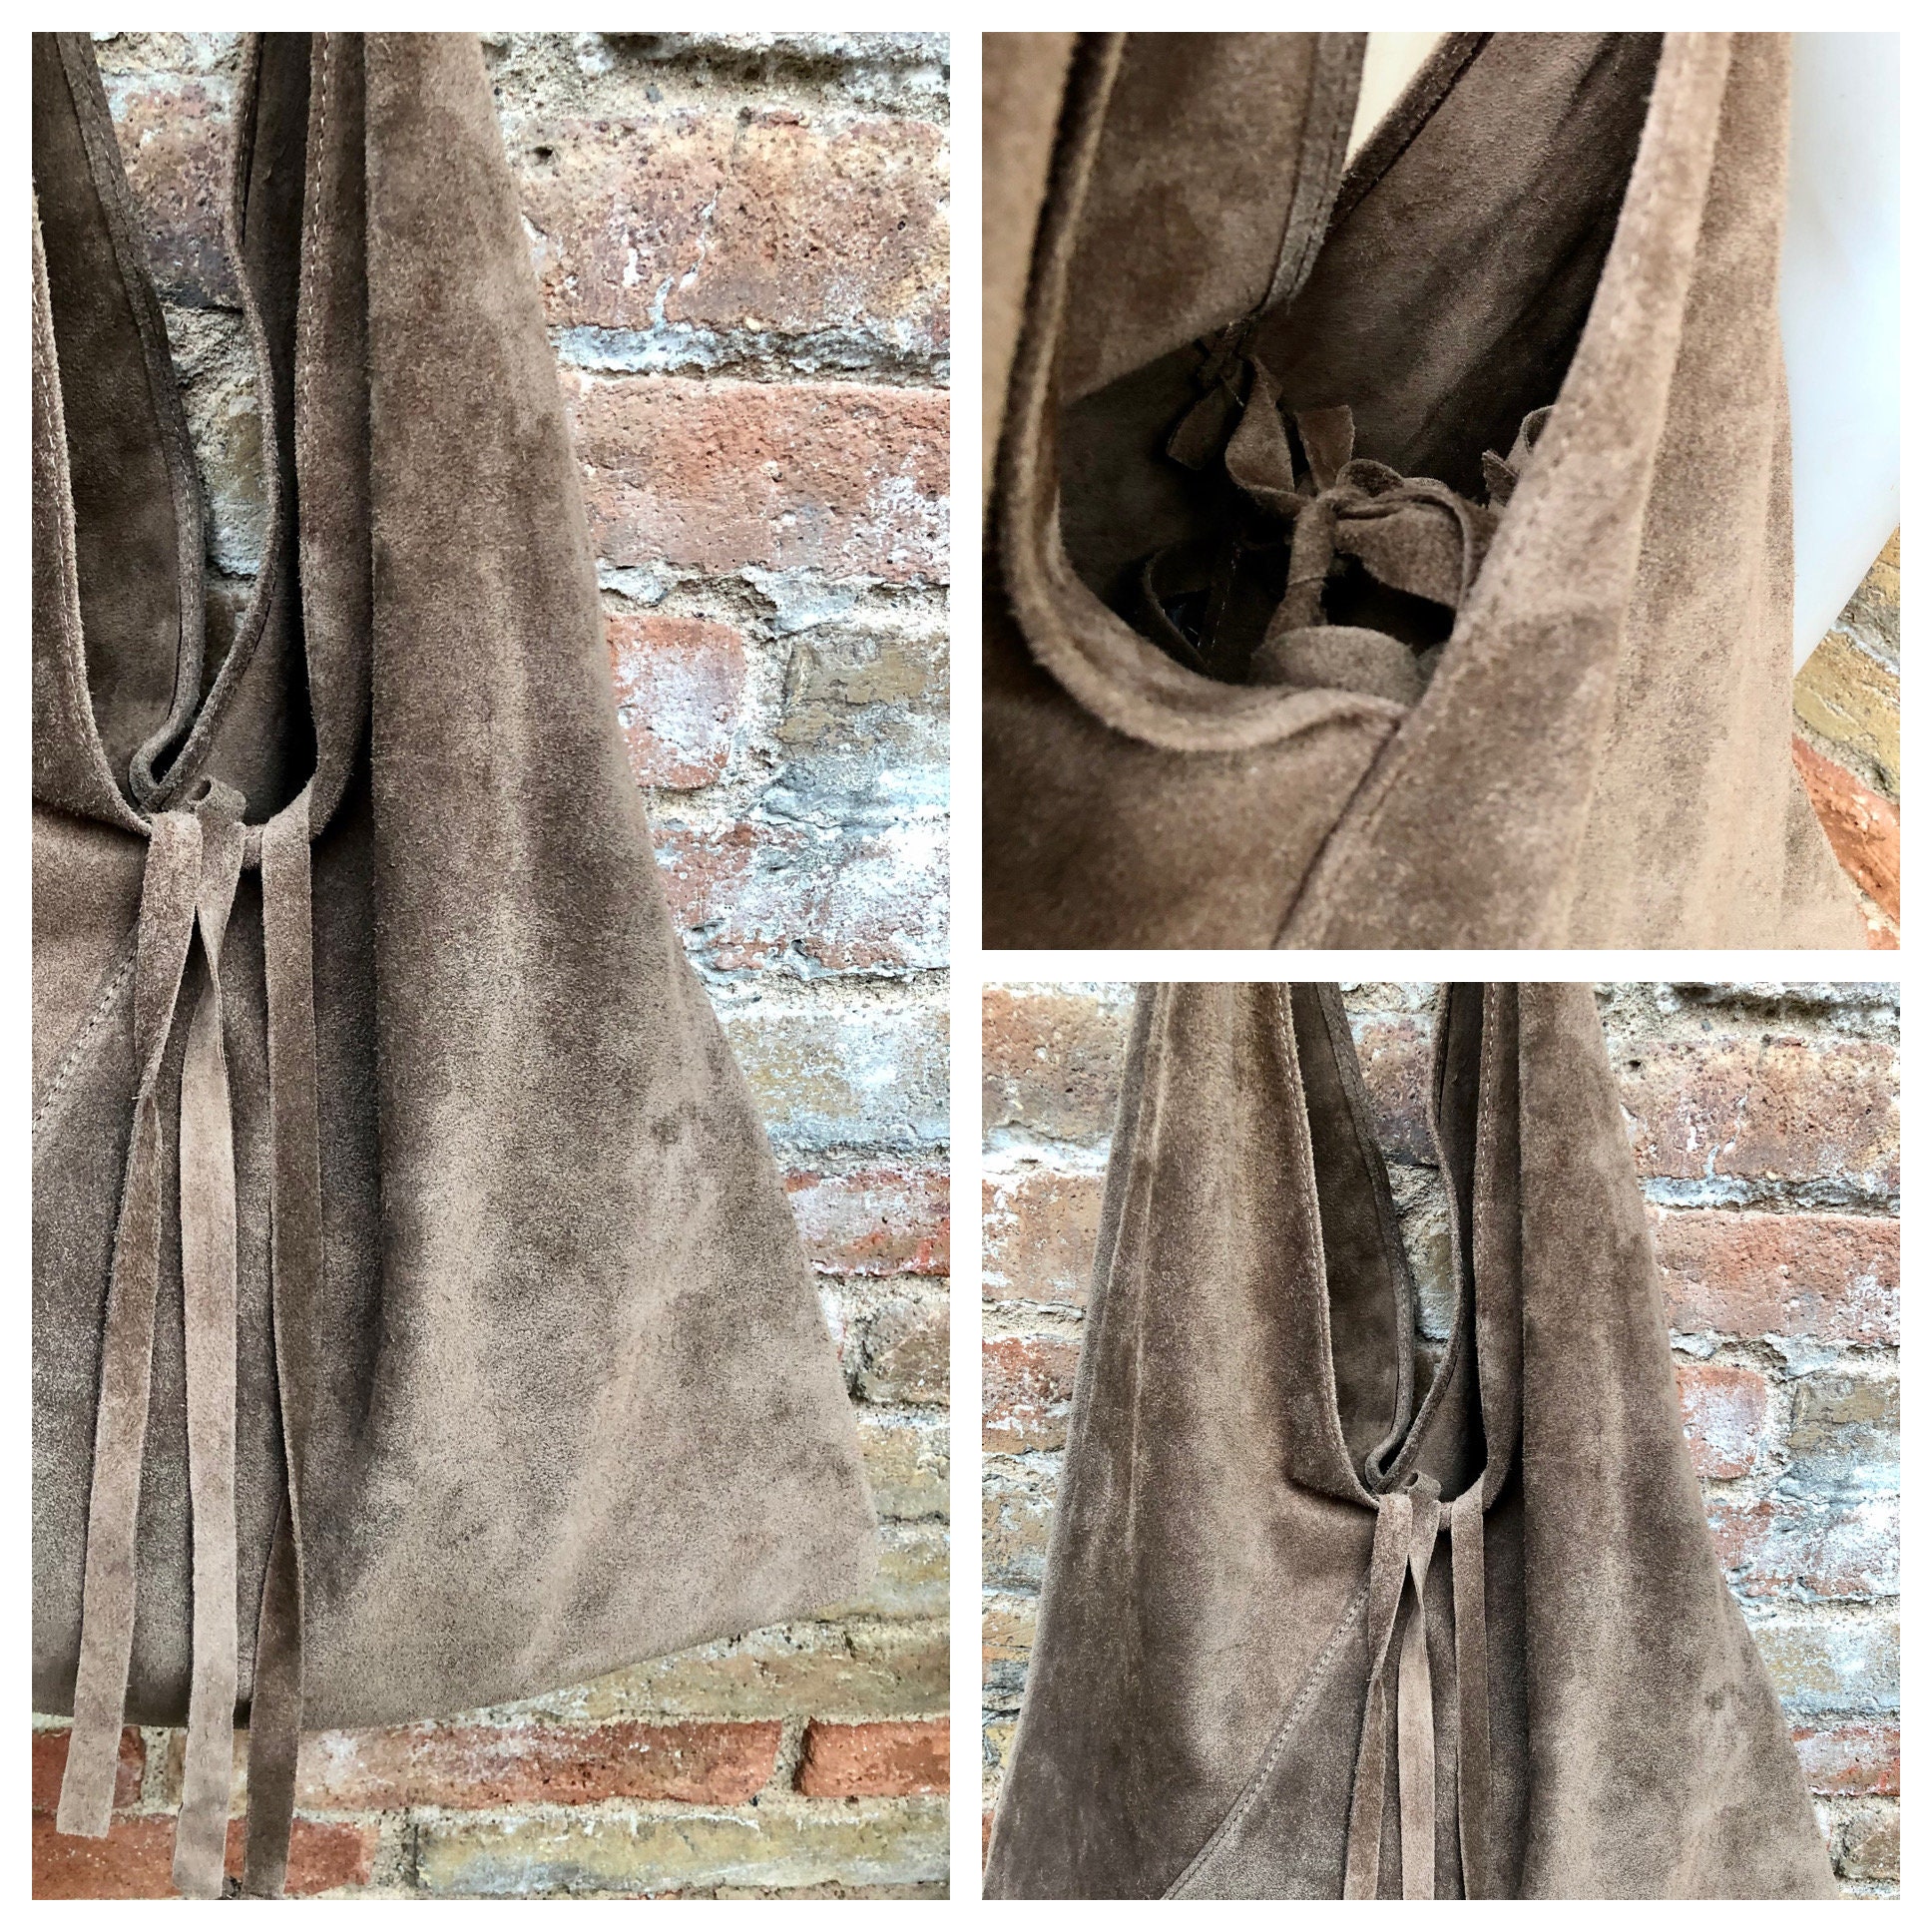 BOHO suede leather bag in light camel BROWN. Soft genuine leather bag –  Handmade suede bags by Good Times Barcelona